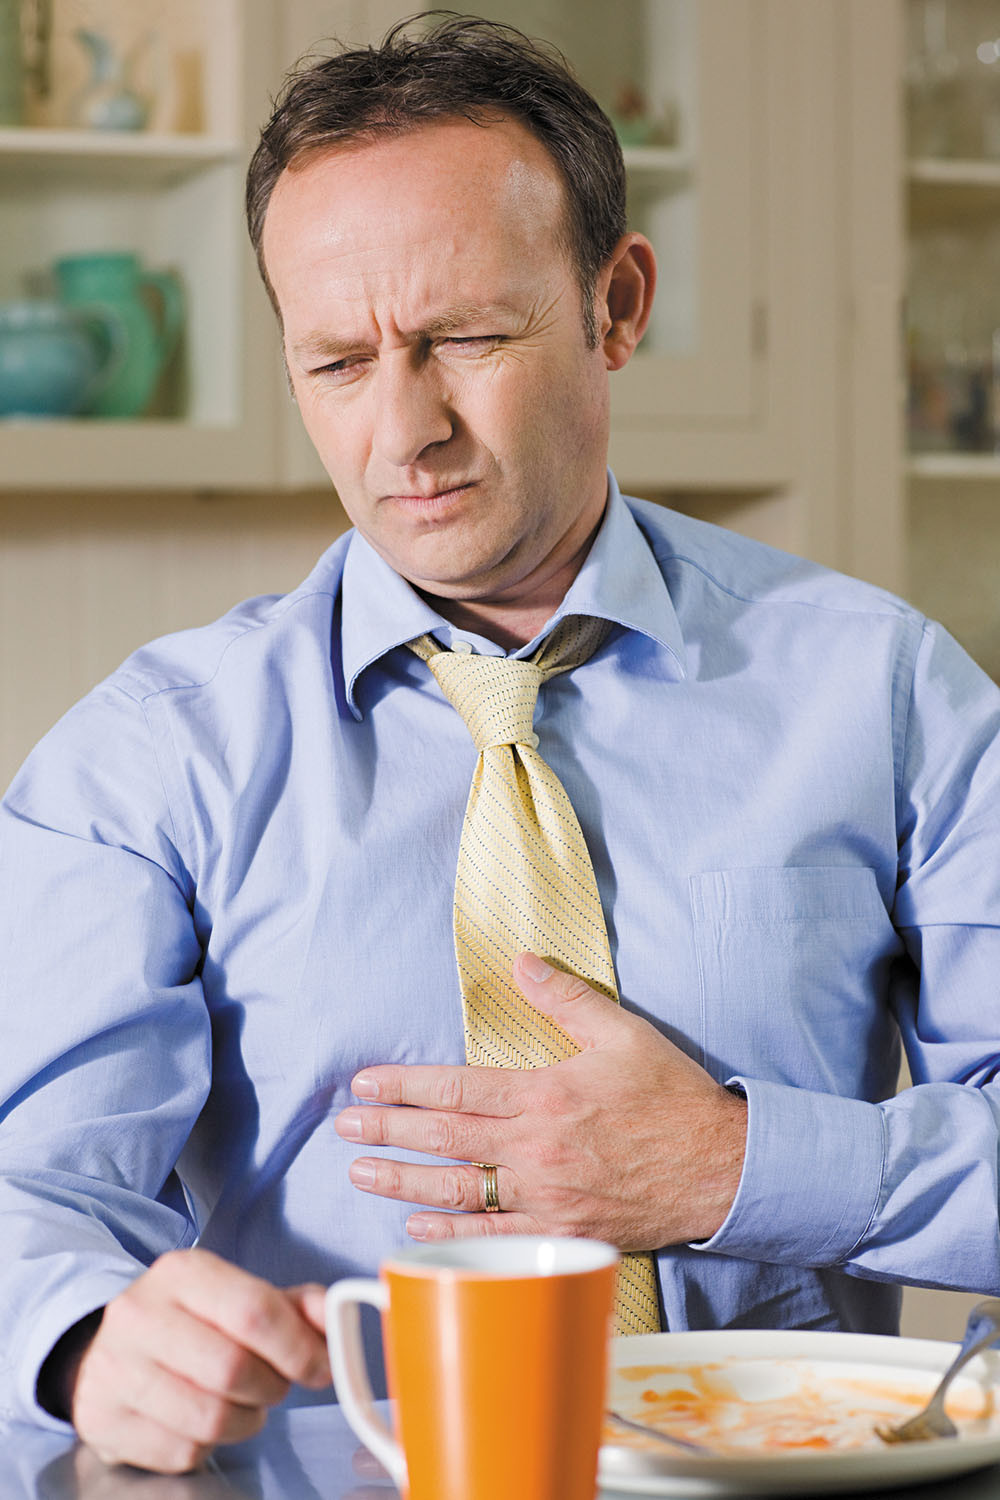 photo of a man experiencing stomach discomfort, holding his hand to his abdomen and wincing